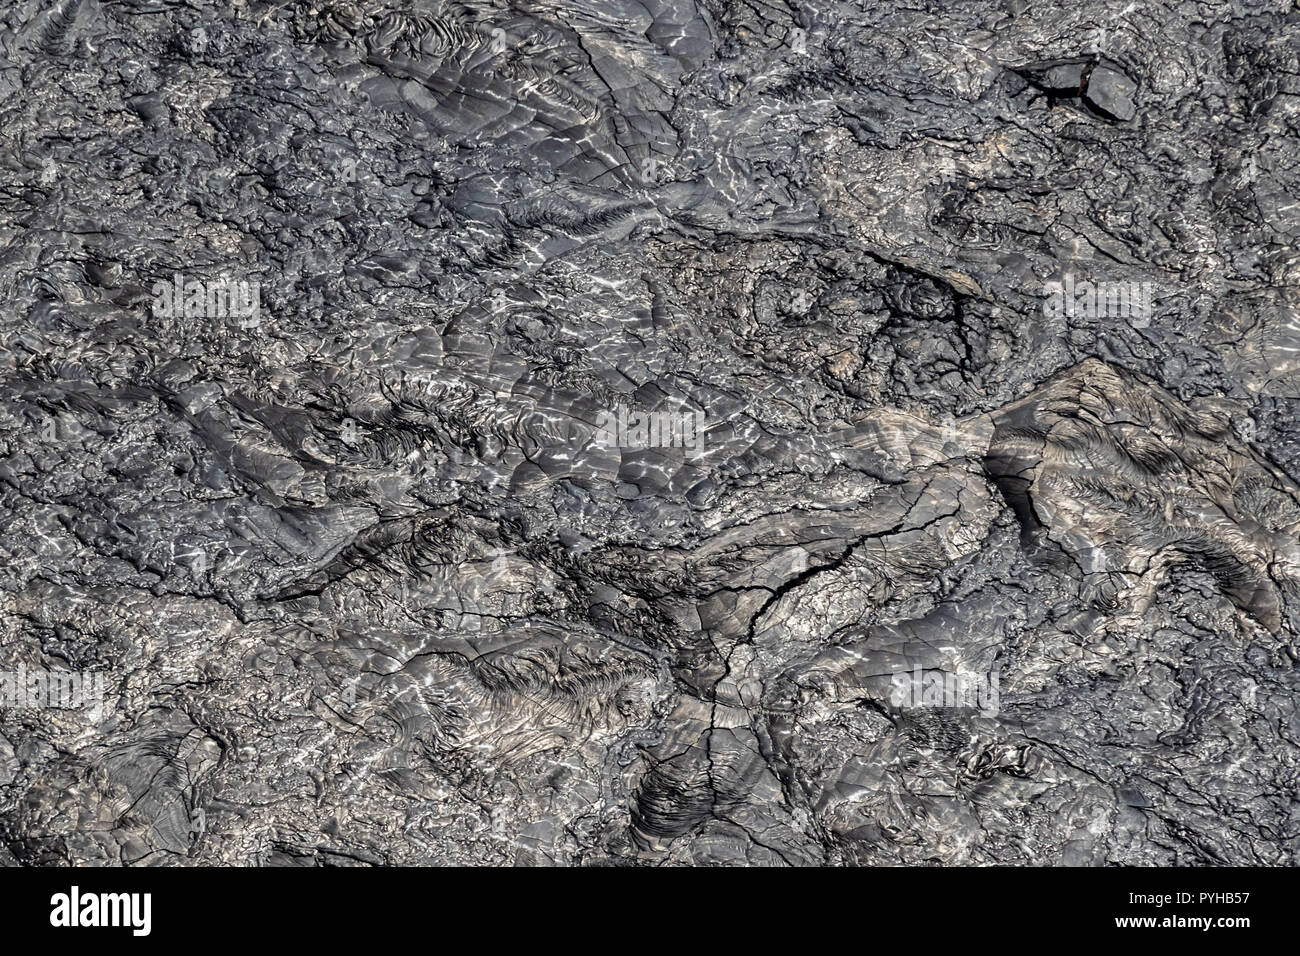 Aerial view of Puu Ooo Volcanic lava field. The pahoehoe lava's surface is swirled and wrinkled, reflecting silver. Giant cracks from cooling. Stock Photo